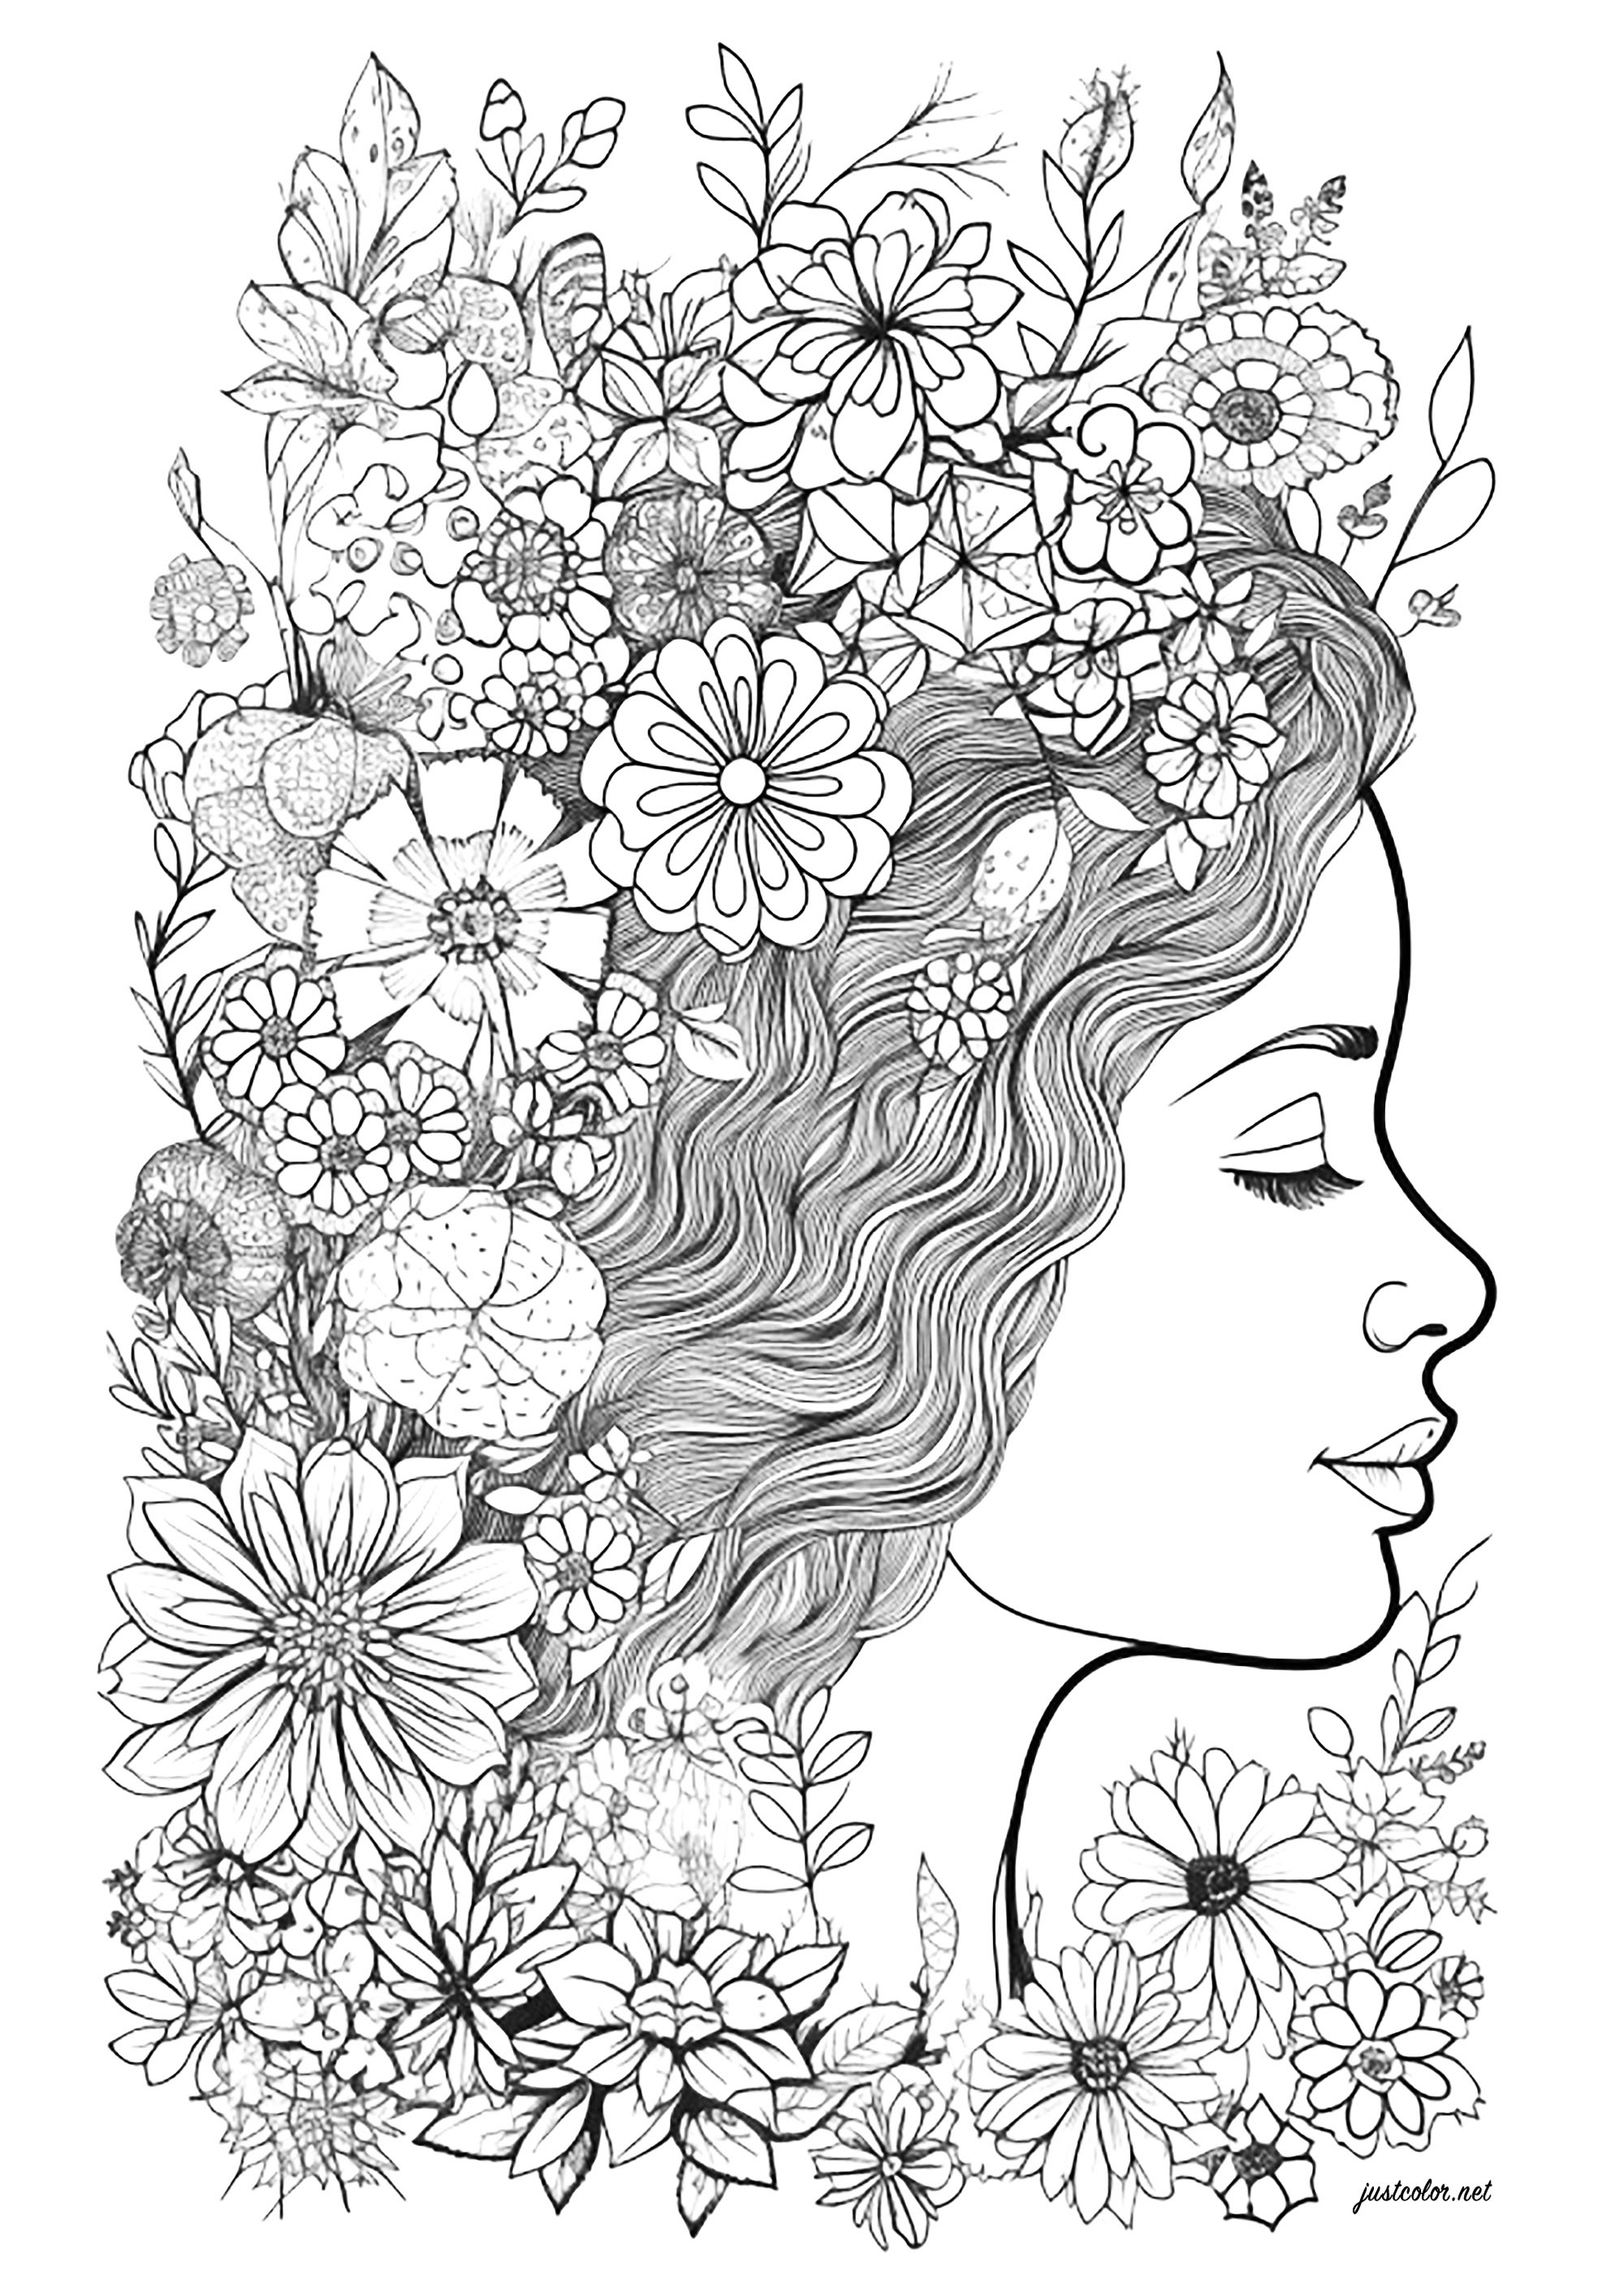 Face of a woman in profile, surrounded by flowers. Color all these beautiful flowers in this woman's hair